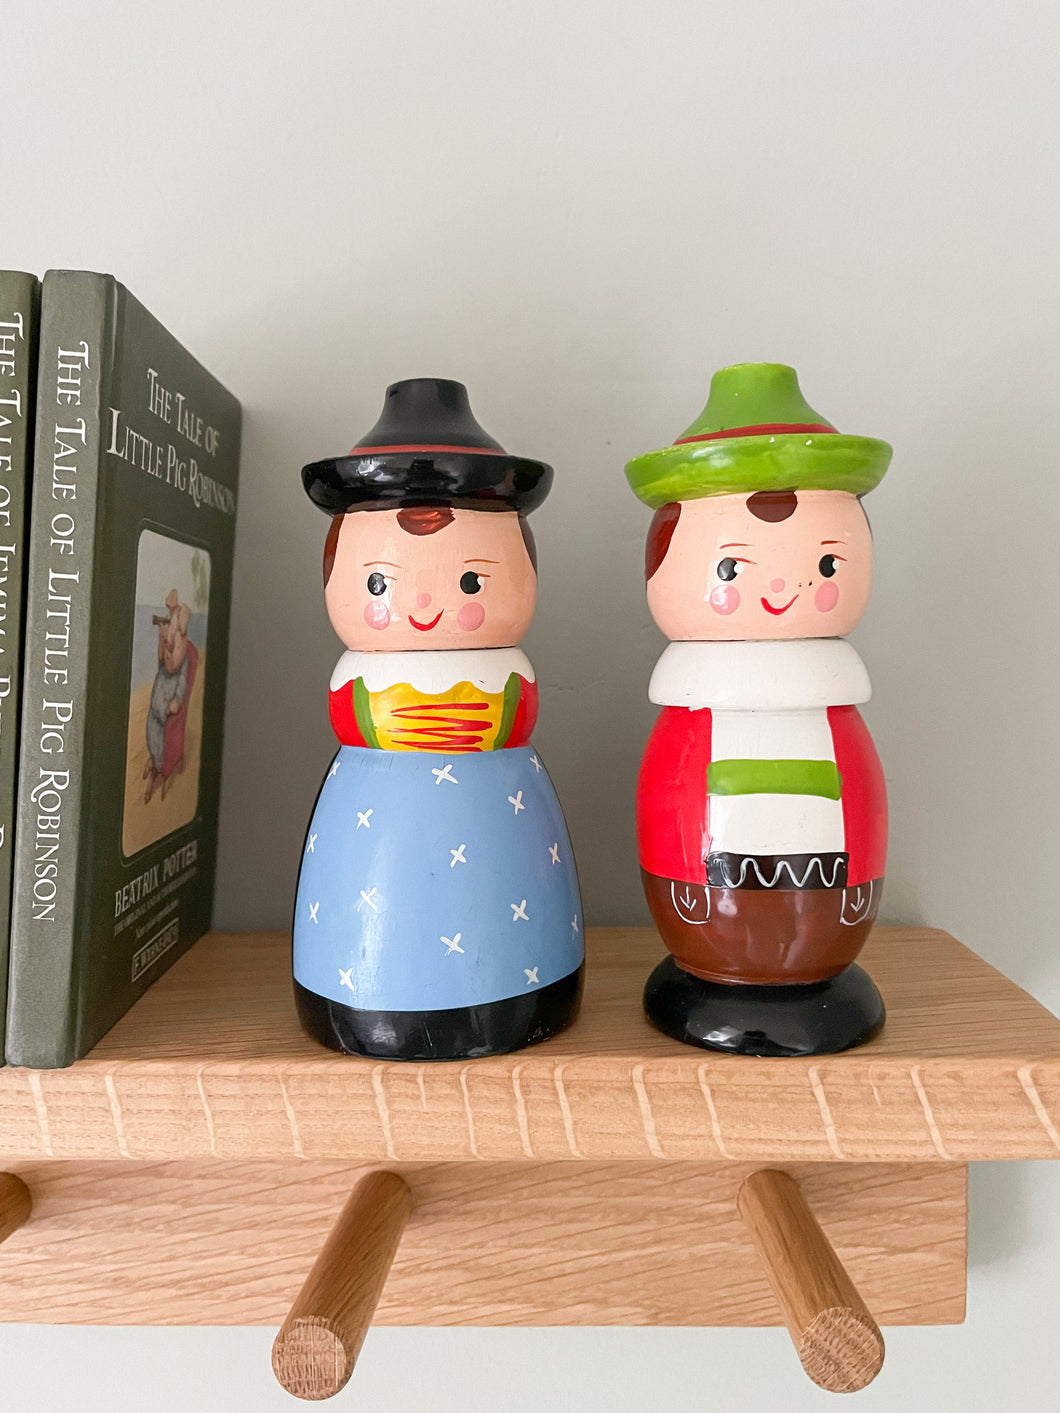 Pair of vintage Italian wooden folk art hand-painted lidded doll pots, a man and a woman, by Sevi 1831 - Moppet